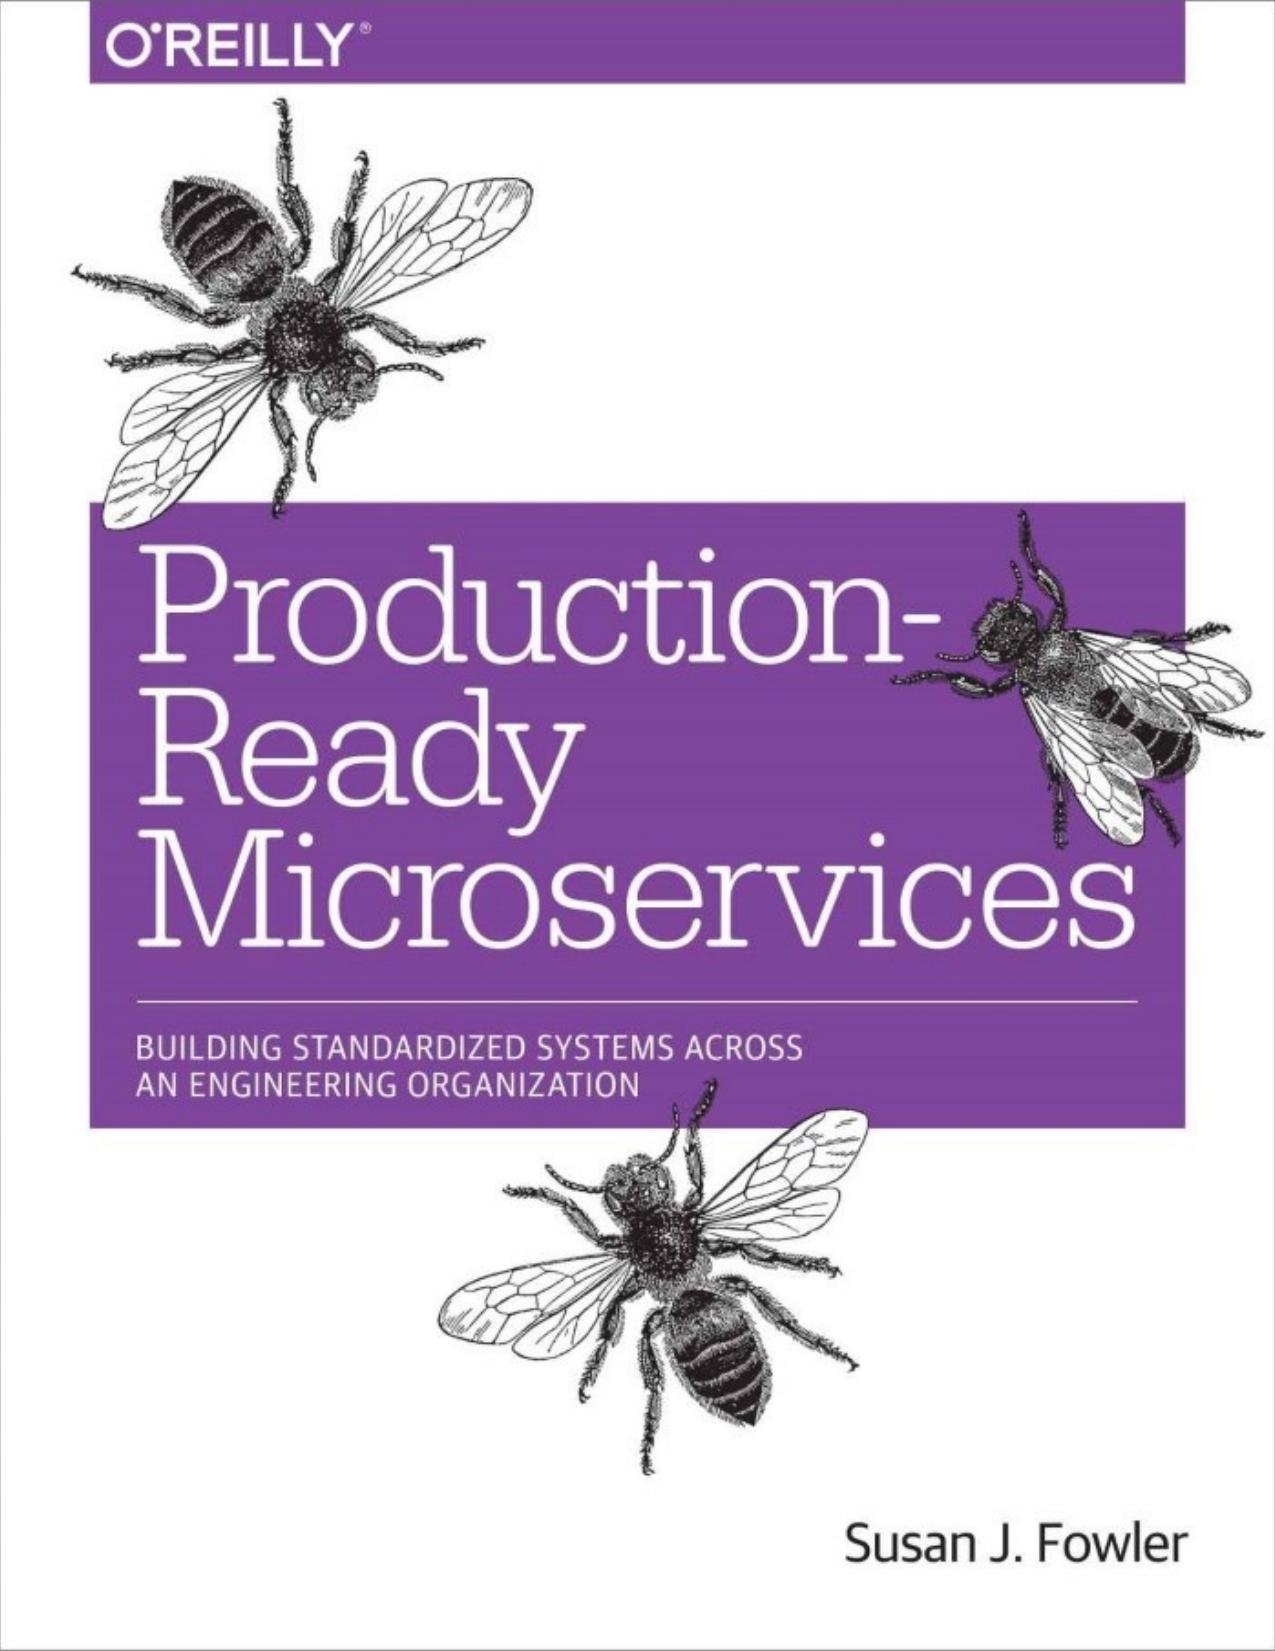 Production-Ready Microservices: Building Stable, Reliable, Fault-Tolerant Systems